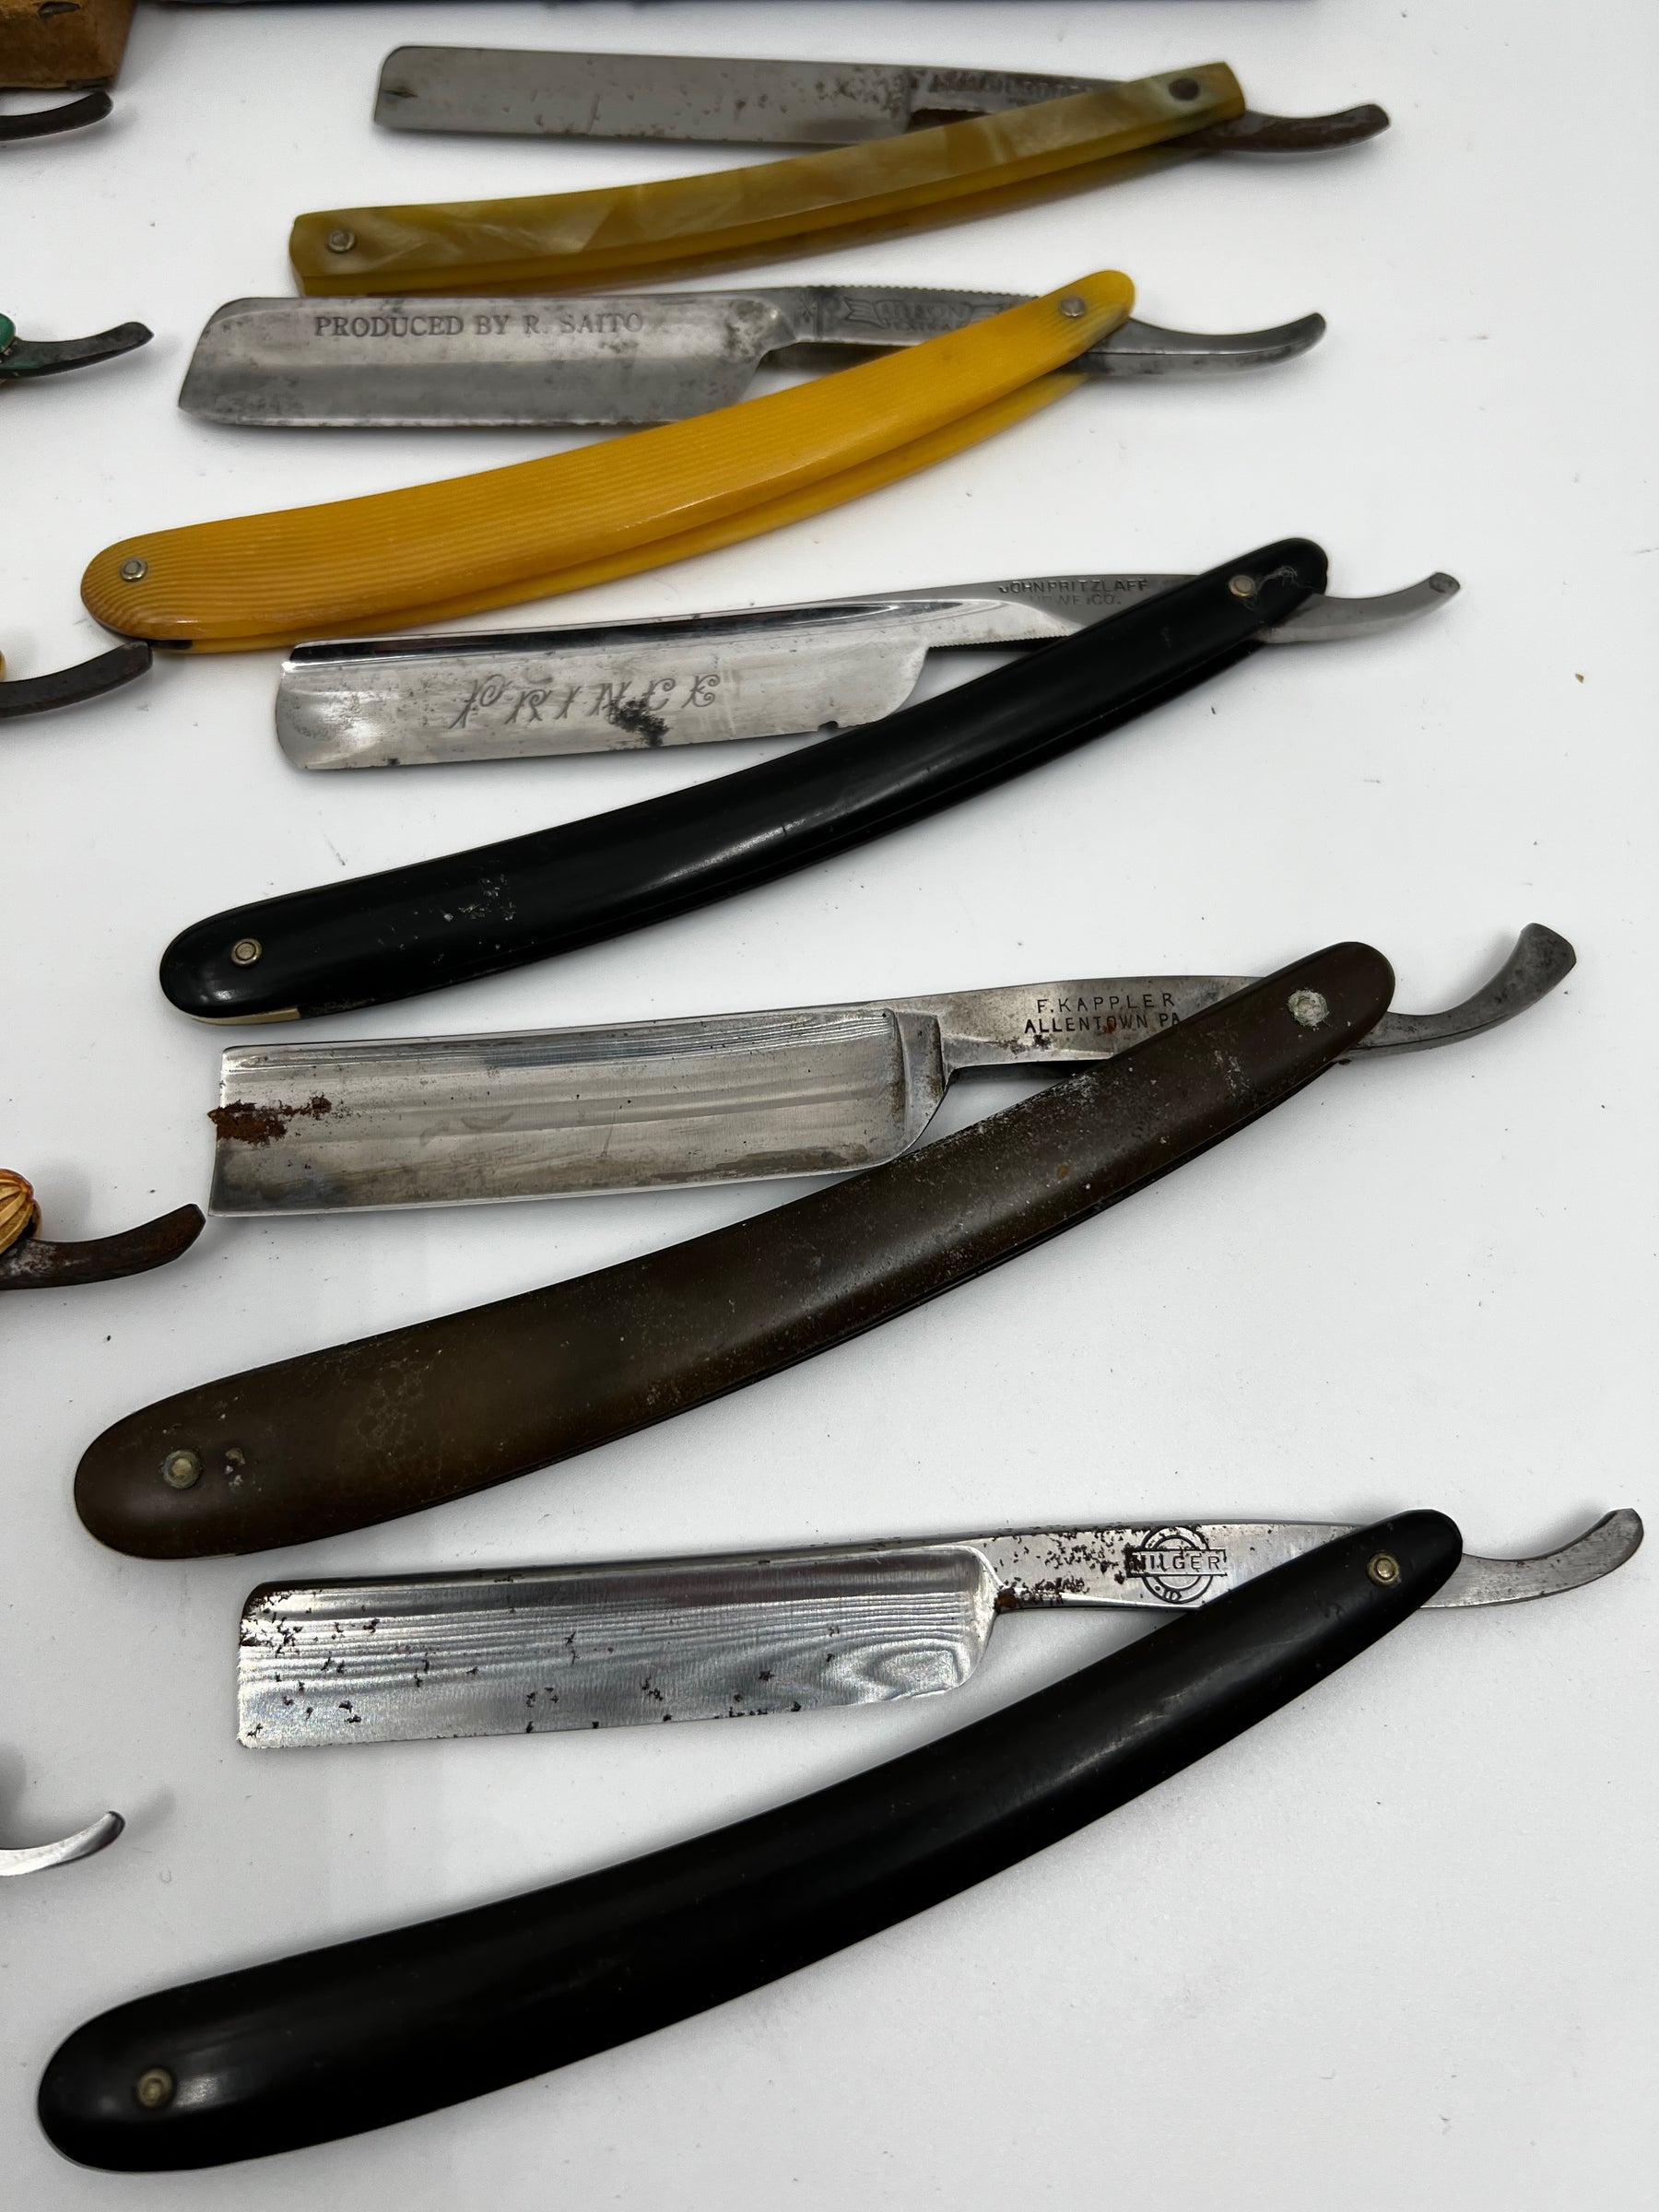 Vintage 10 Straight Razor Lot #26 - May Contain Sheffield, Solingen, Japanese & USA makers, as pictured